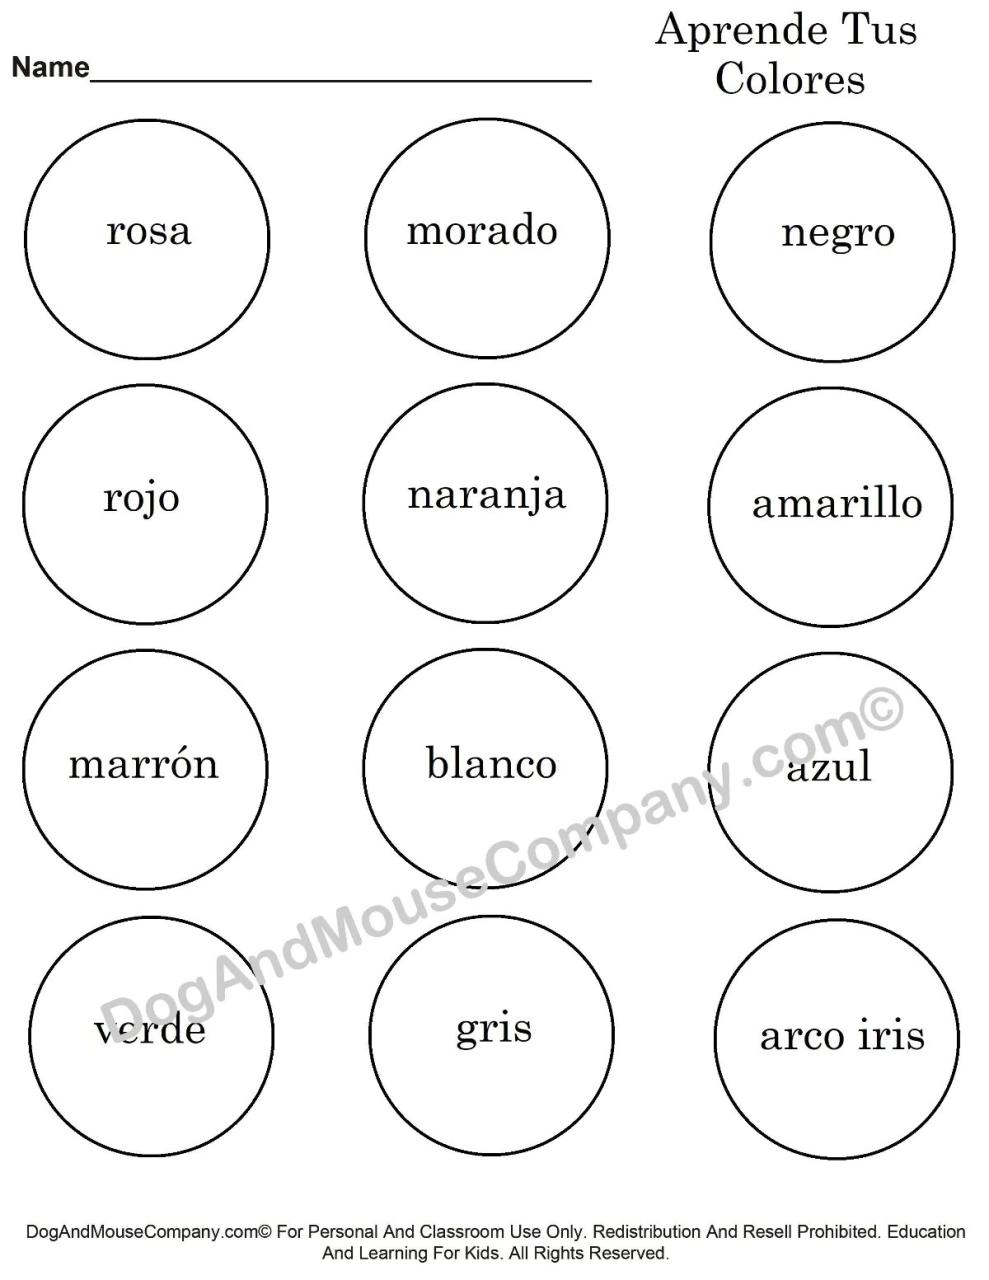 Learn Your Colors In Spanish Aprende Tus Colores Coloring Page Wor